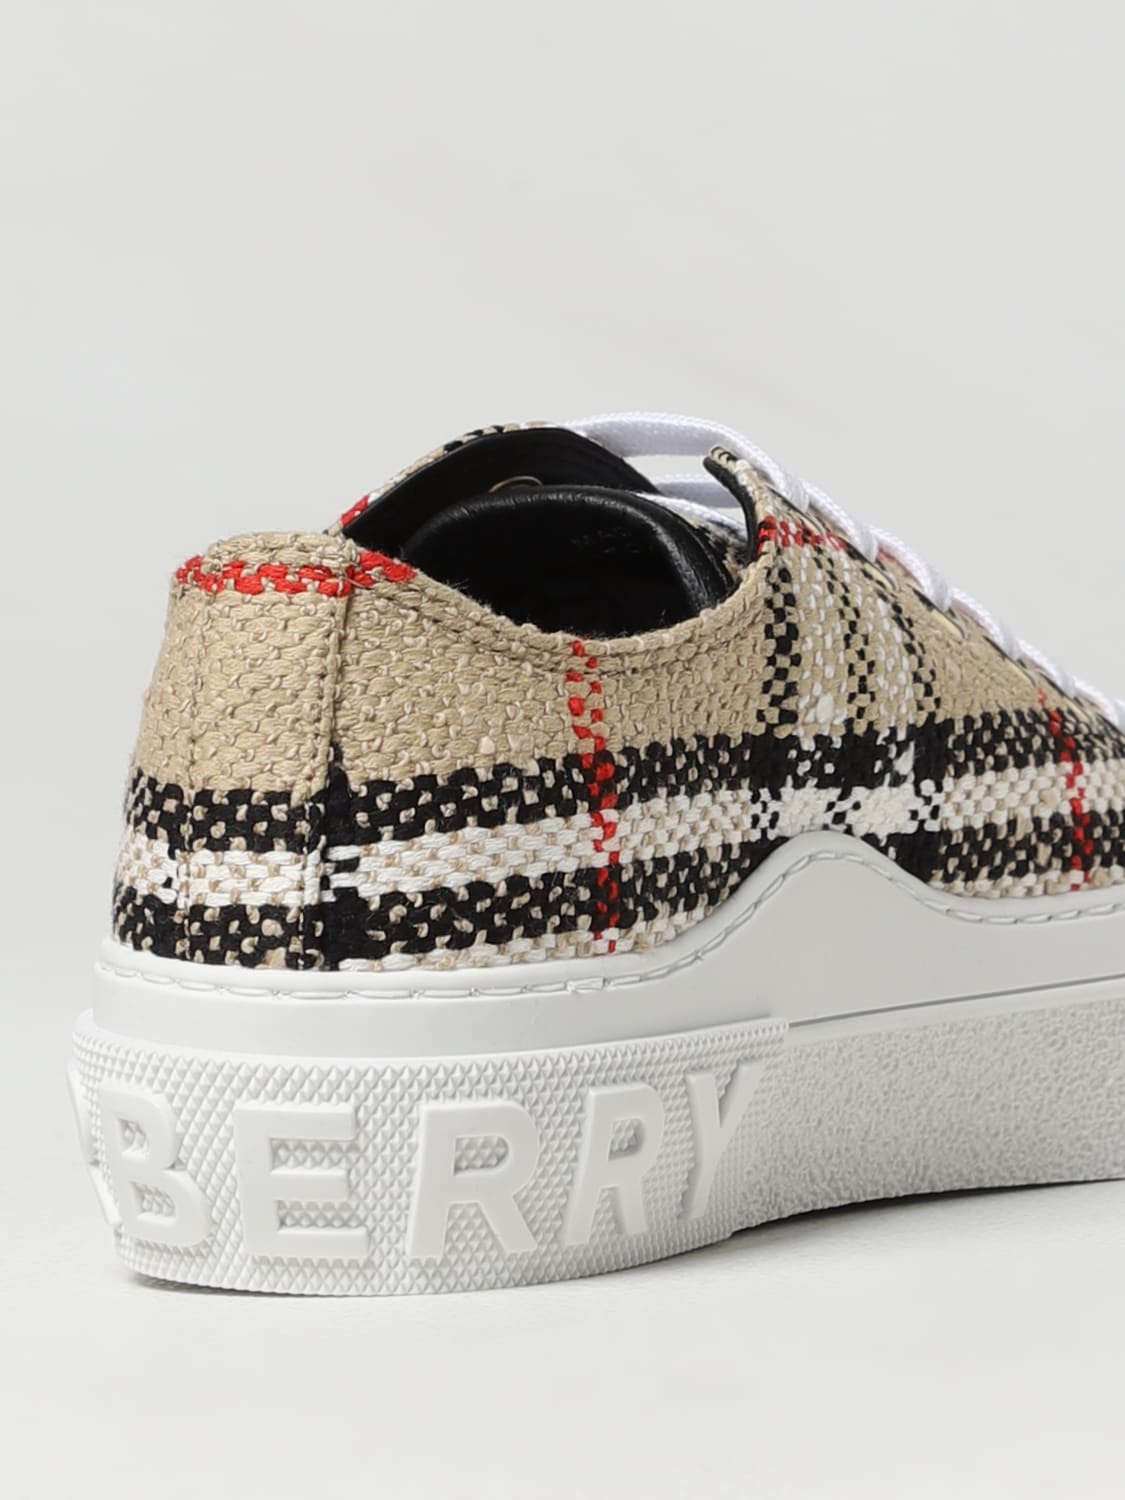 Burberry sneakers in cotton and wool blend